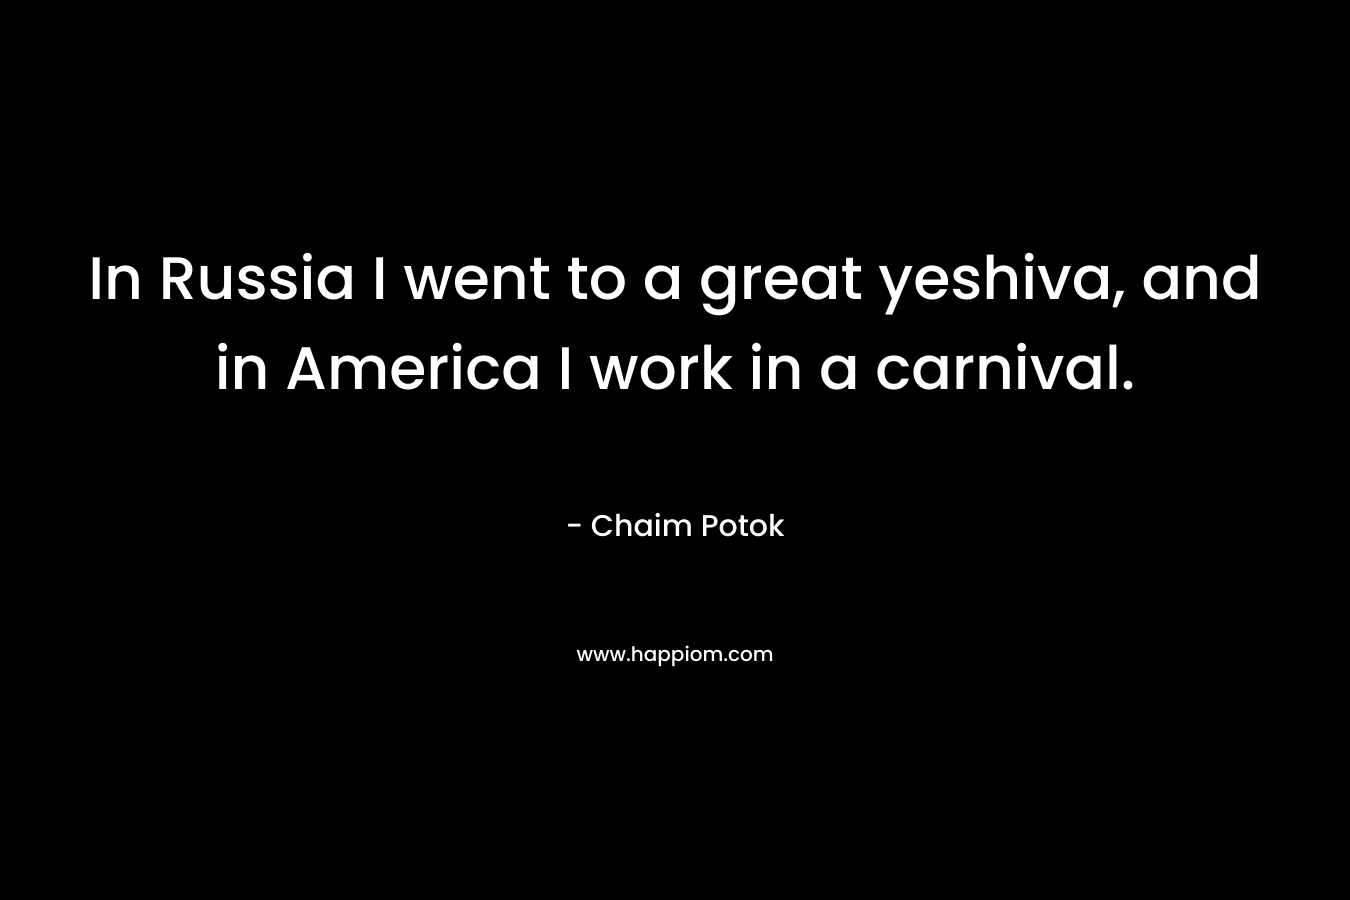 In Russia I went to a great yeshiva, and in America I work in a carnival. – Chaim Potok